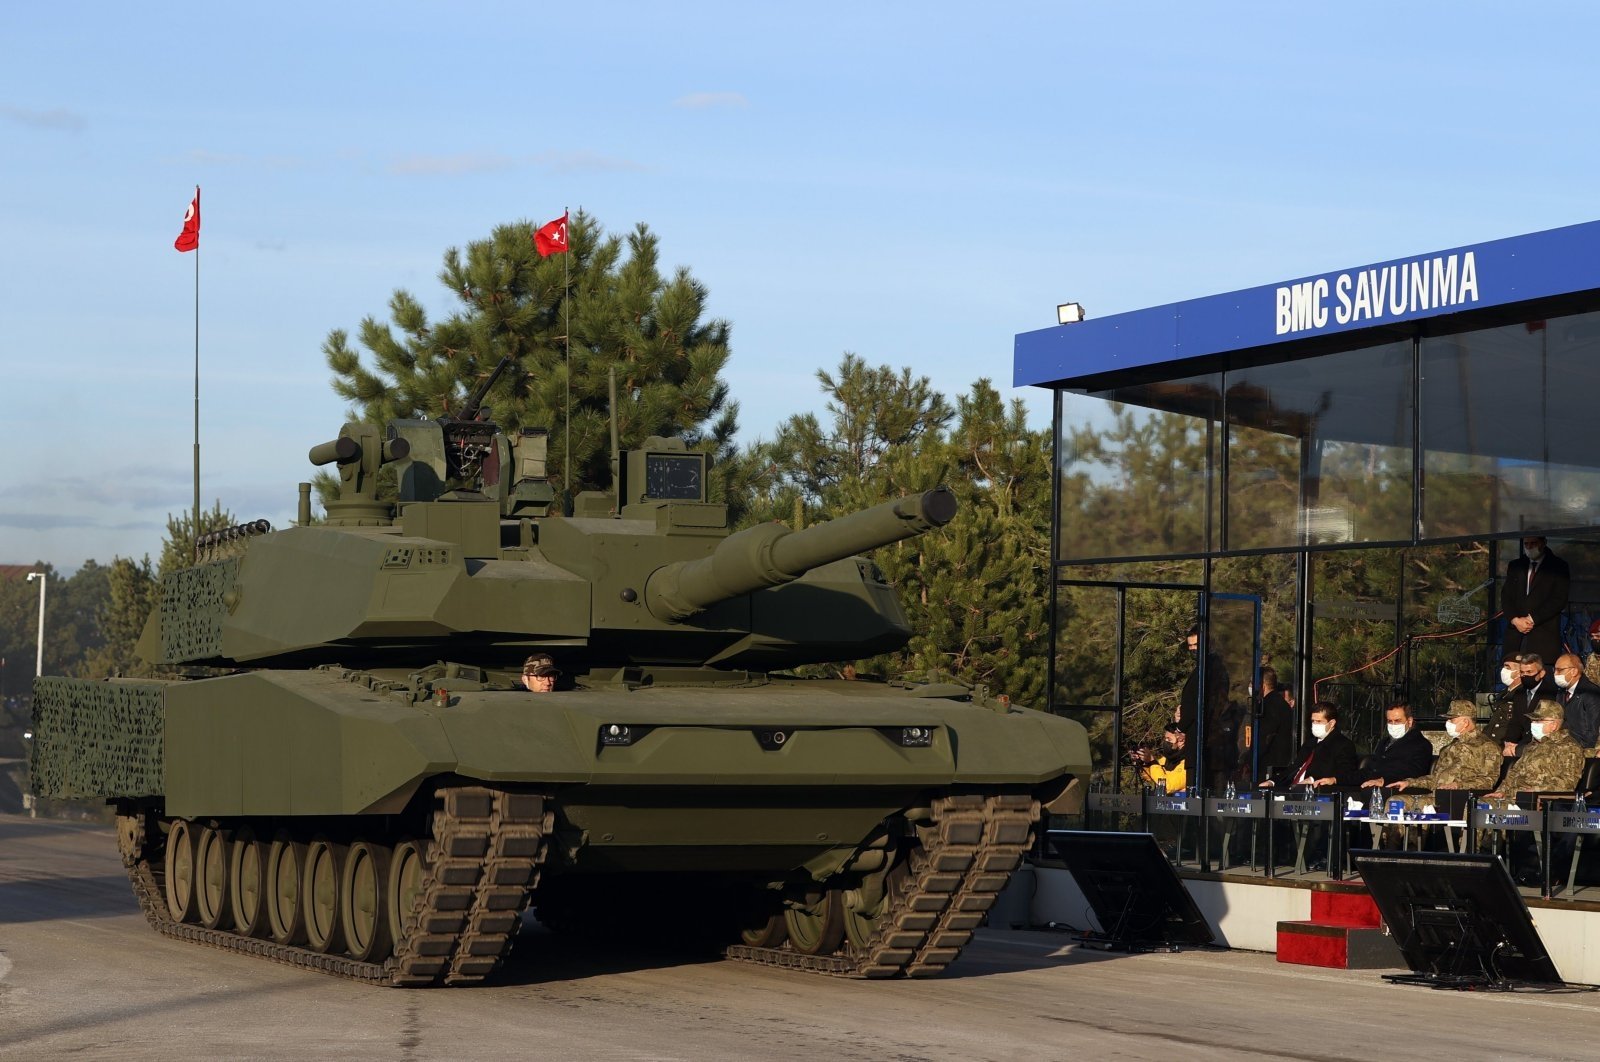 A Leopard 2A4 platform, but replaced with the turret developed for the Turkish Altay main battle tank, is shown at the Sakarya facility of leading land vehicle manufacturer, BMC, Sakarya, northwestern Turkey, Jan. 25, 2021. (DHA Photo)